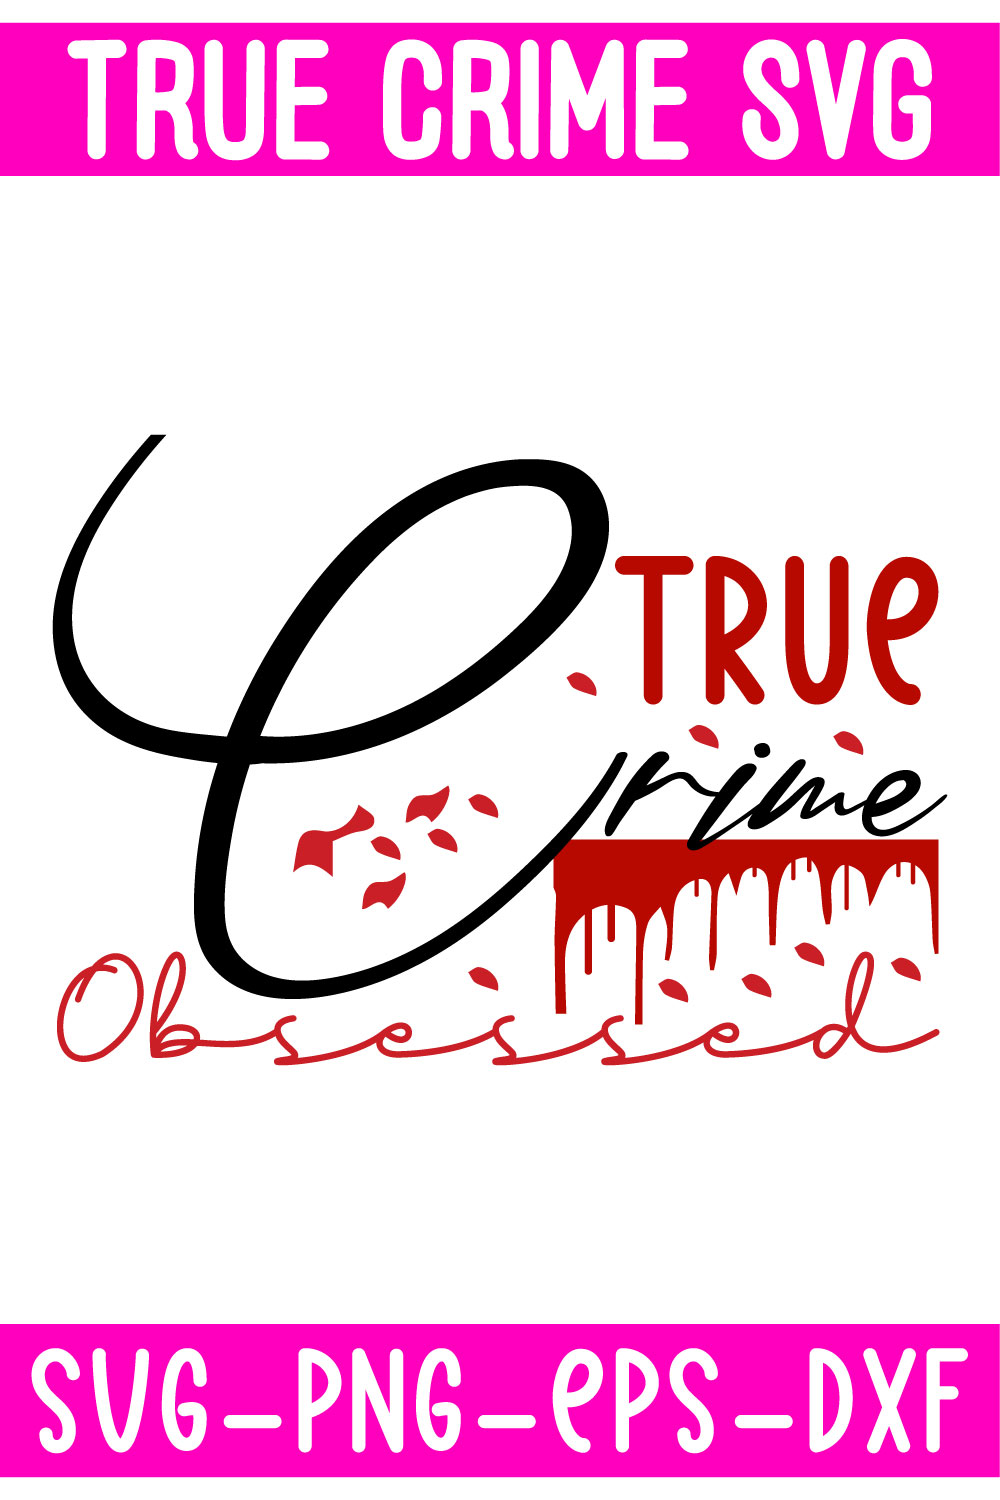 True crime svg font with dripping blood.